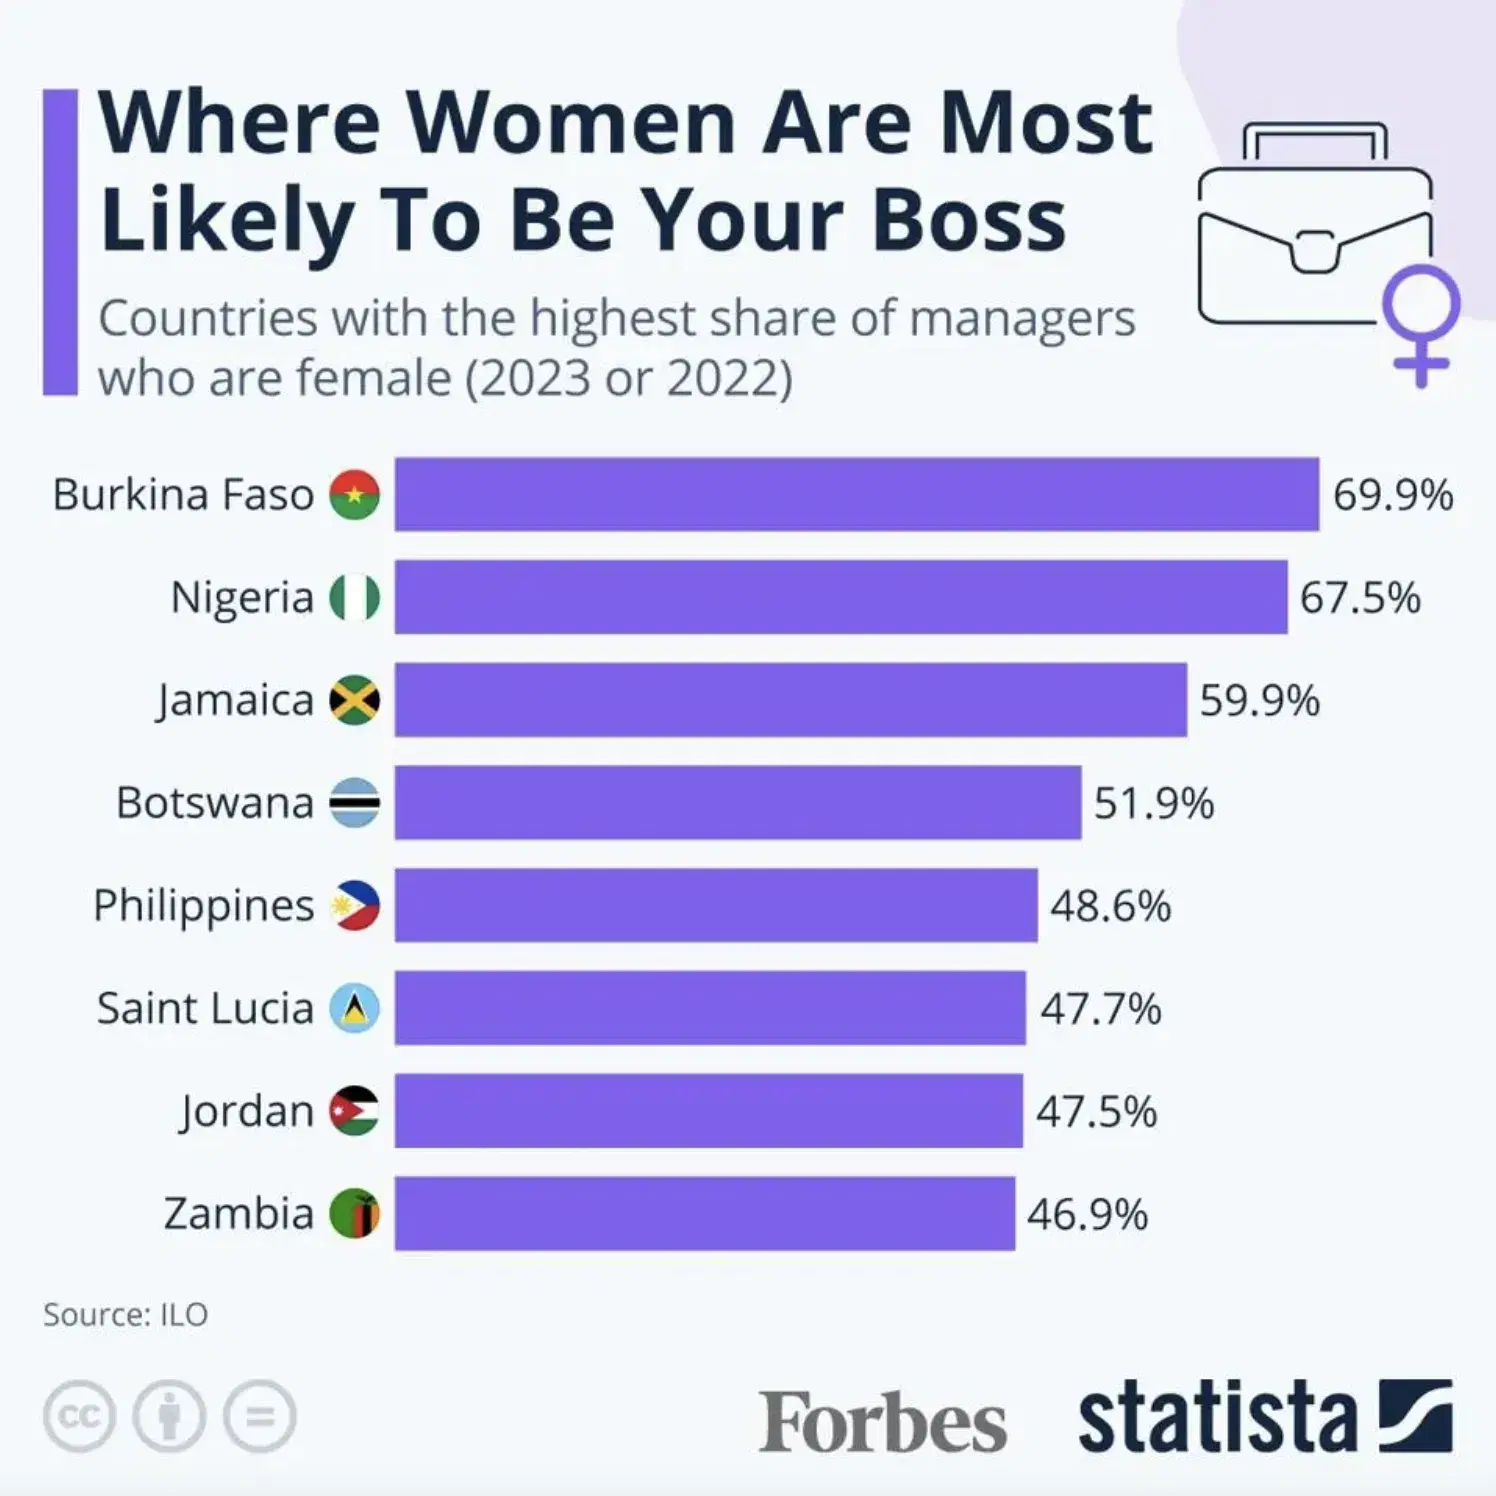 Countries with the Highest Share of Female Managers